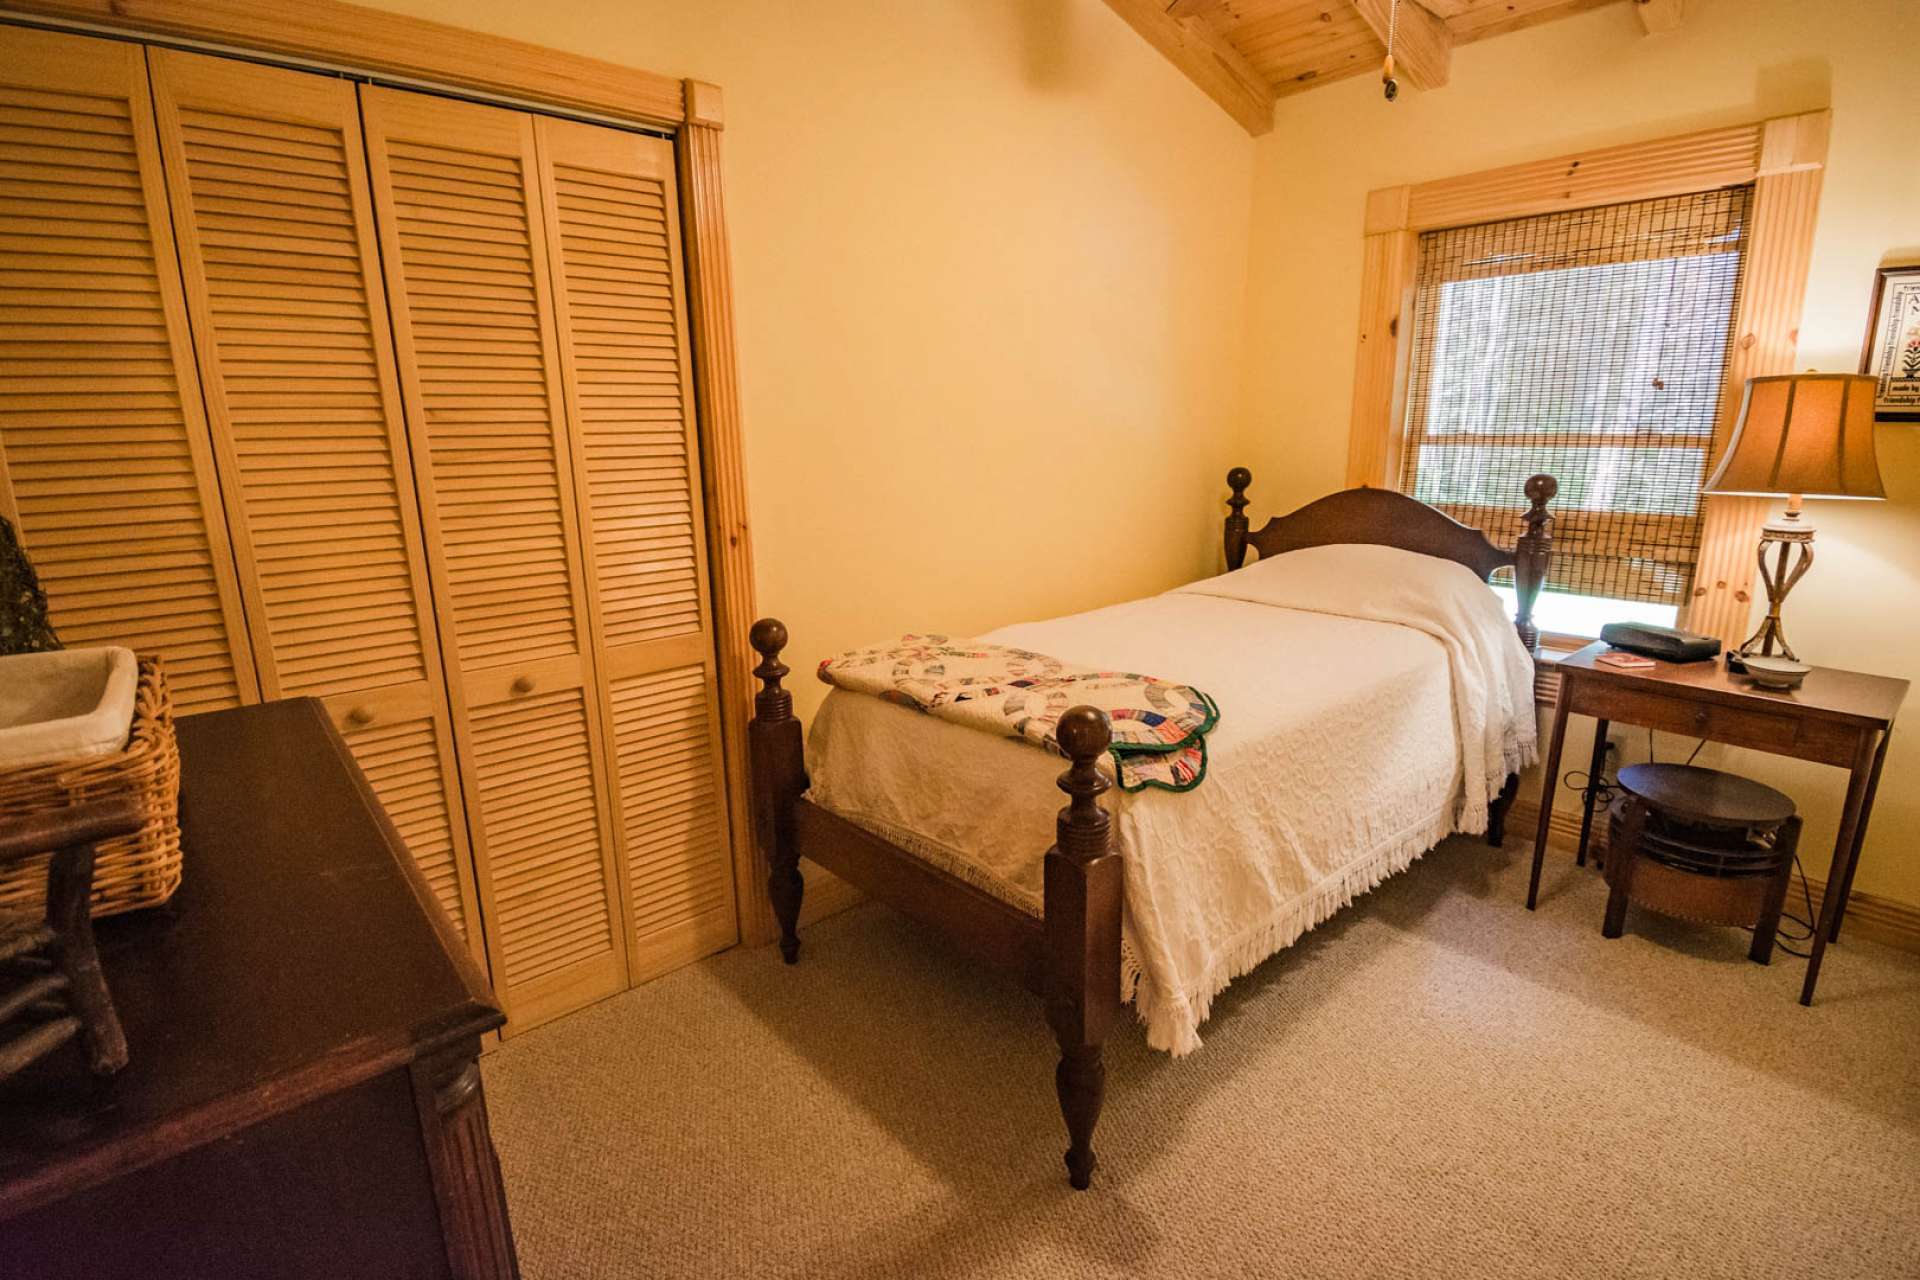 Both upper level bedrooms are generously sized and feature vaulted ceilings and carpeted floors.